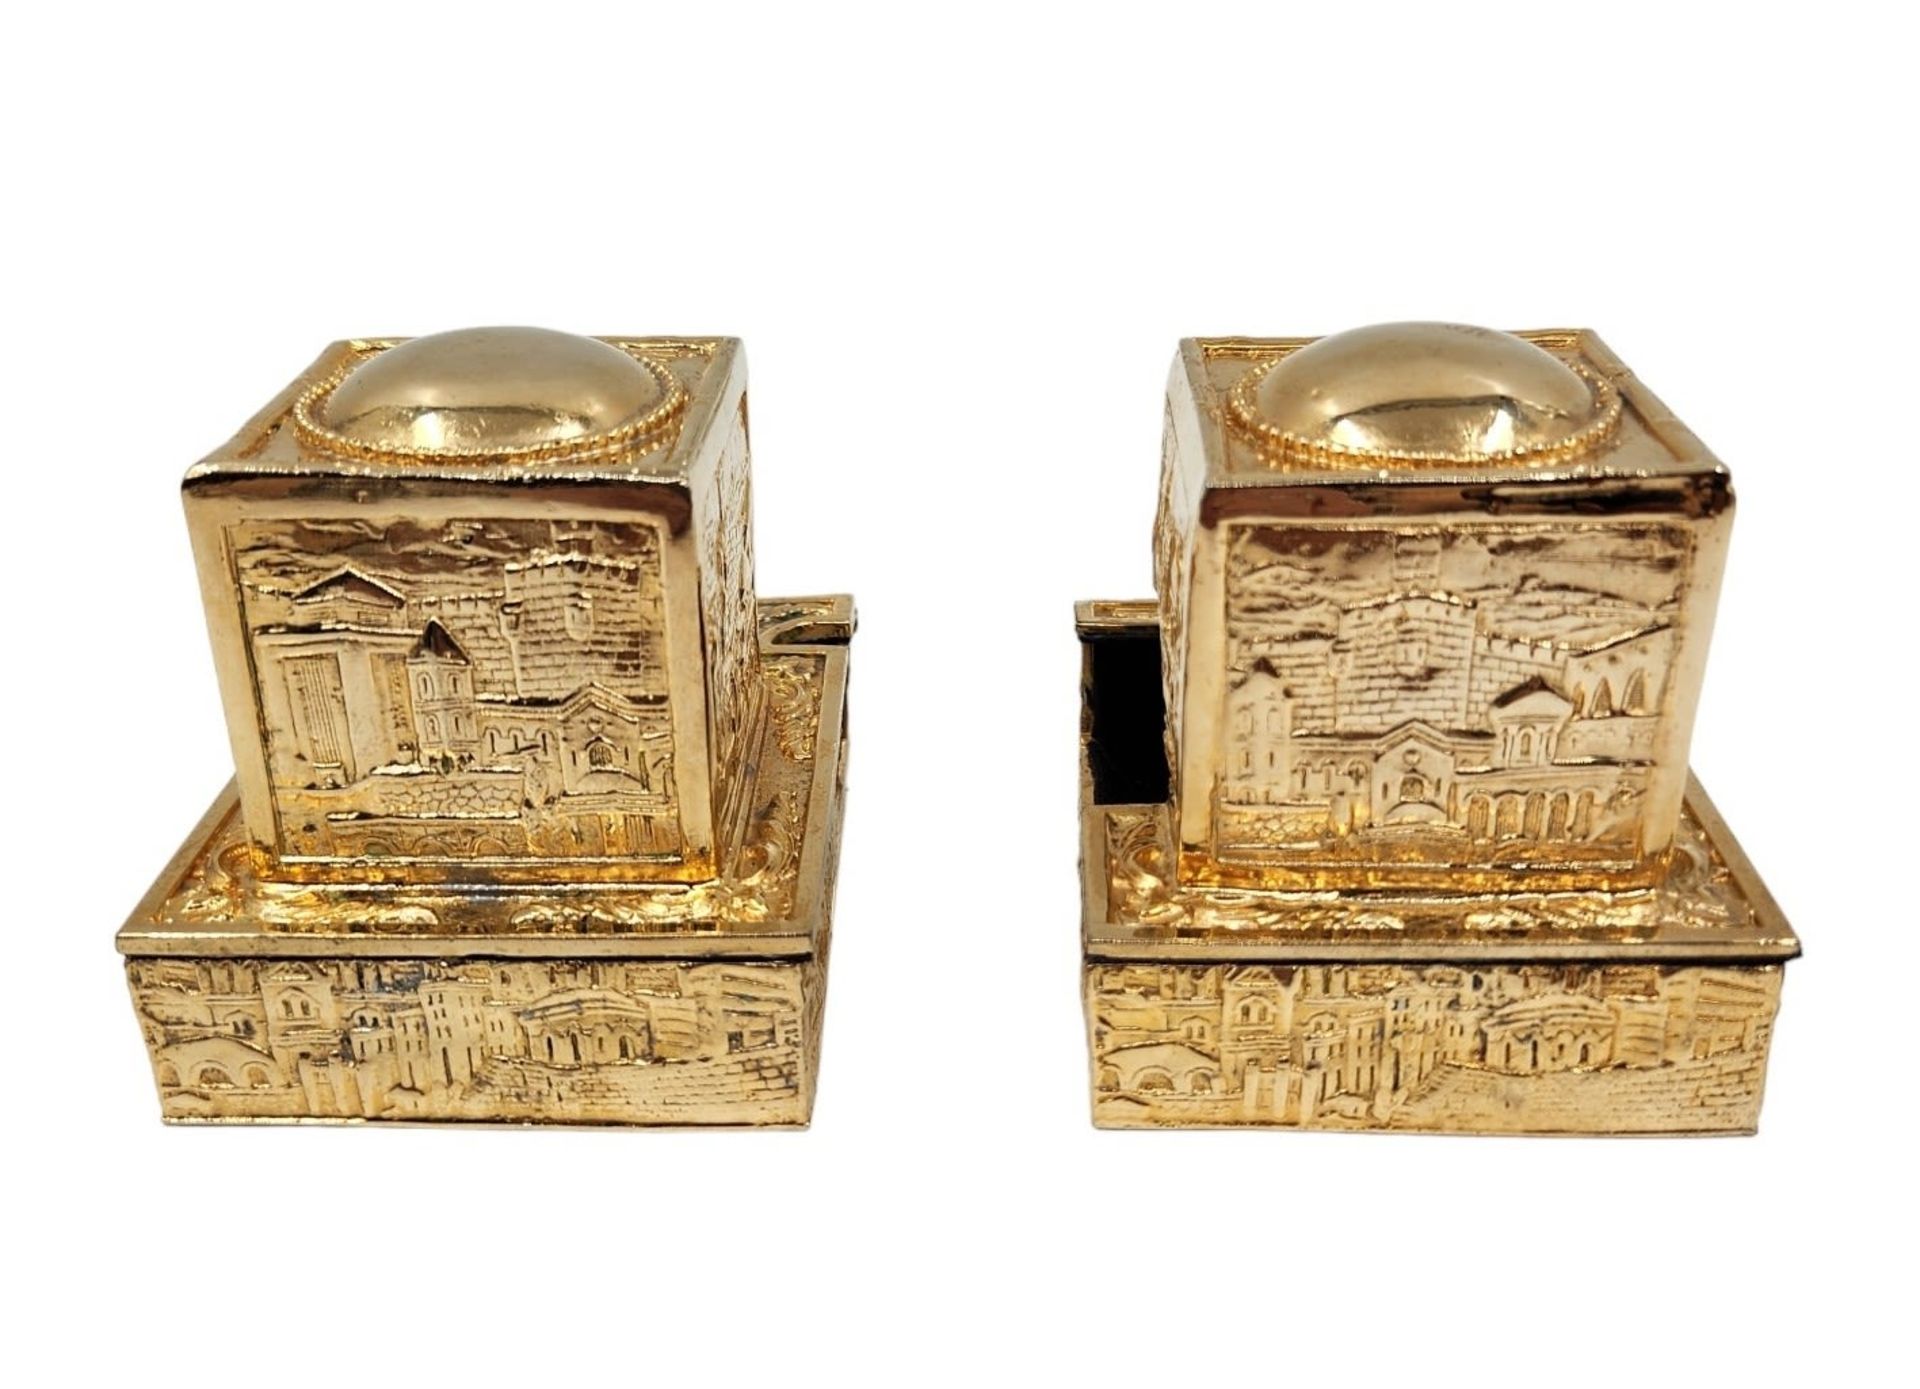 A pair of high-quality and impressive Tefillin housings made of 'sterling' silver plated with